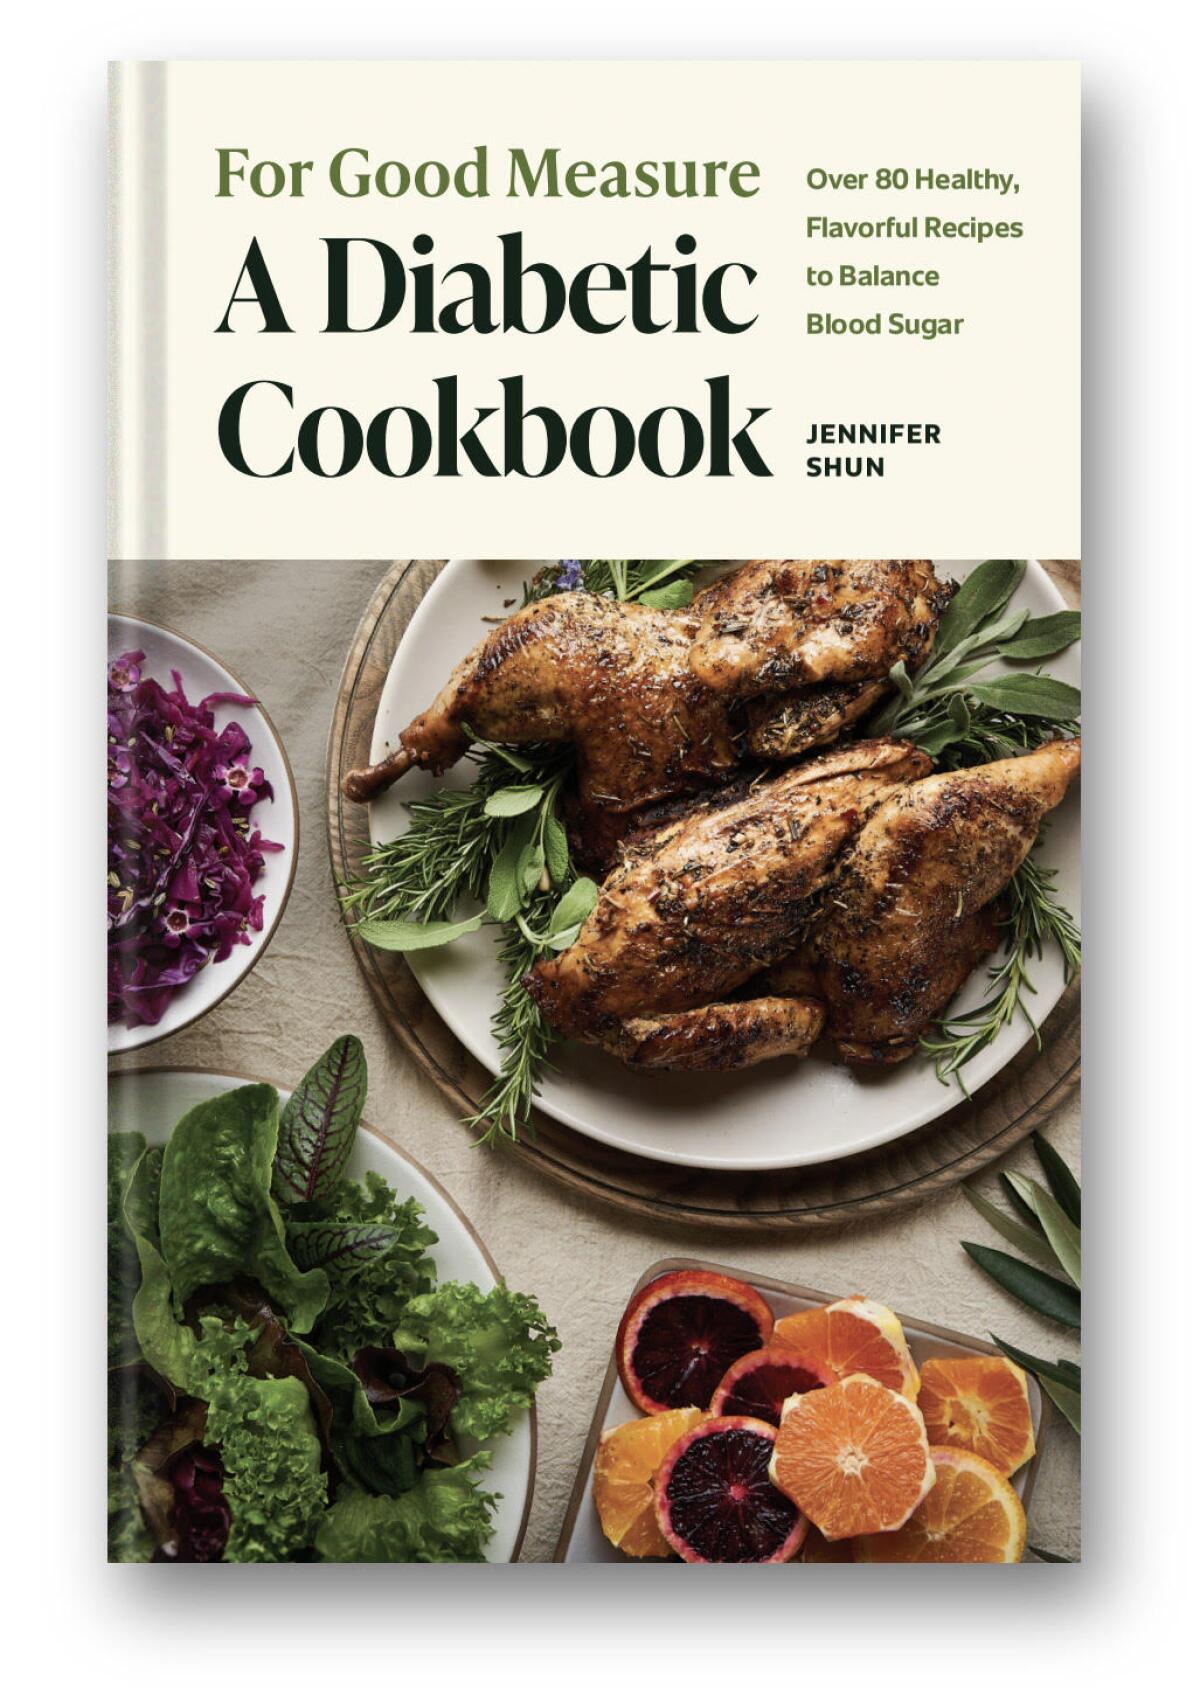 Local's cookbook 'For Good Measure' offers delicious recipes to help manage  diabetes - Del Mar Times